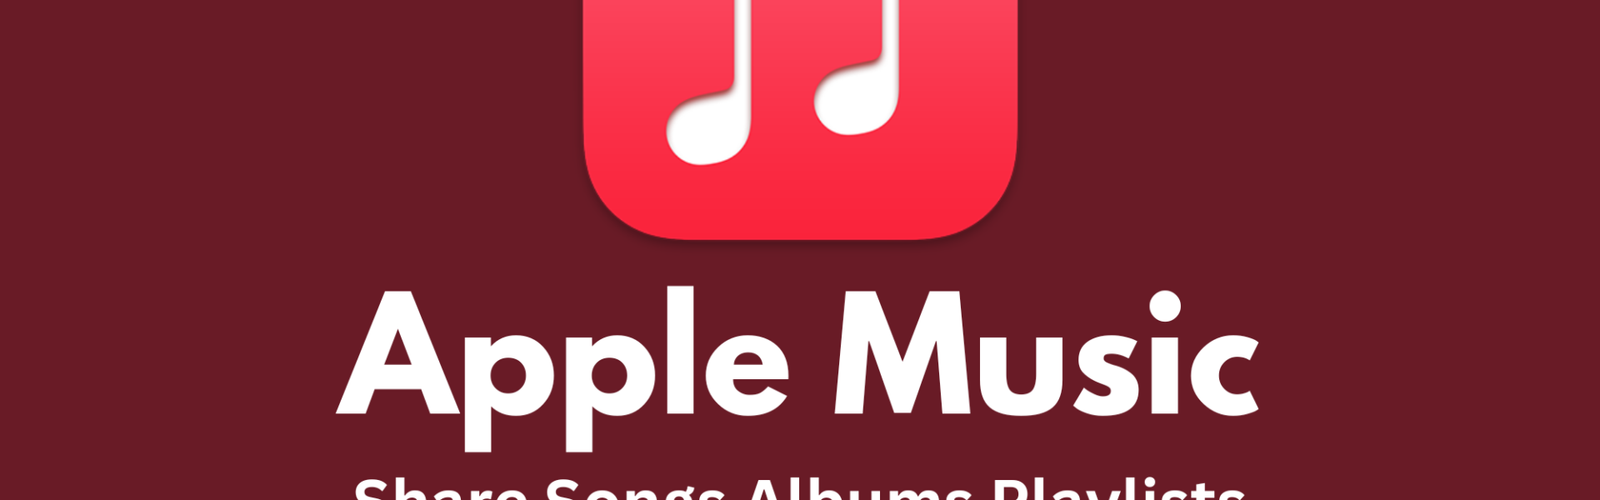 Apple Music is in Rough Shape. Here's How to Fix It.